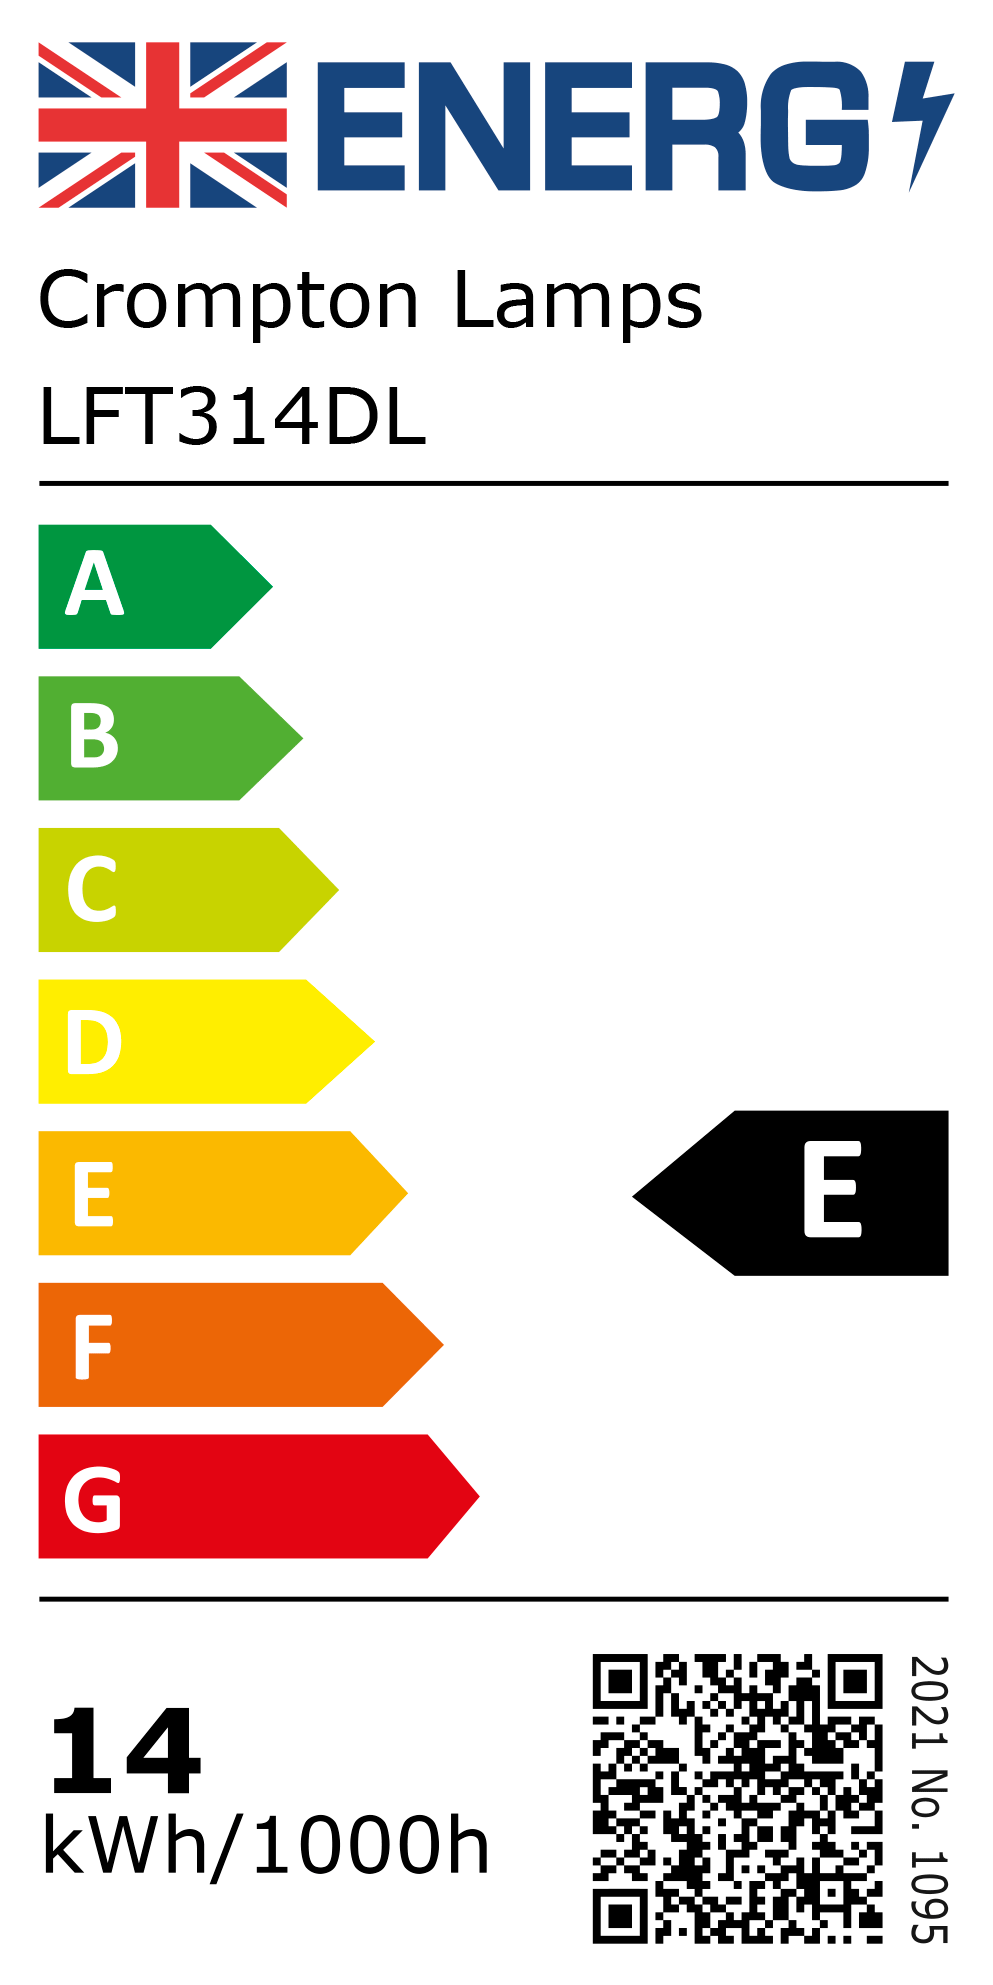 New 2021 Energy Rating Label: Stock Code LFT314DL